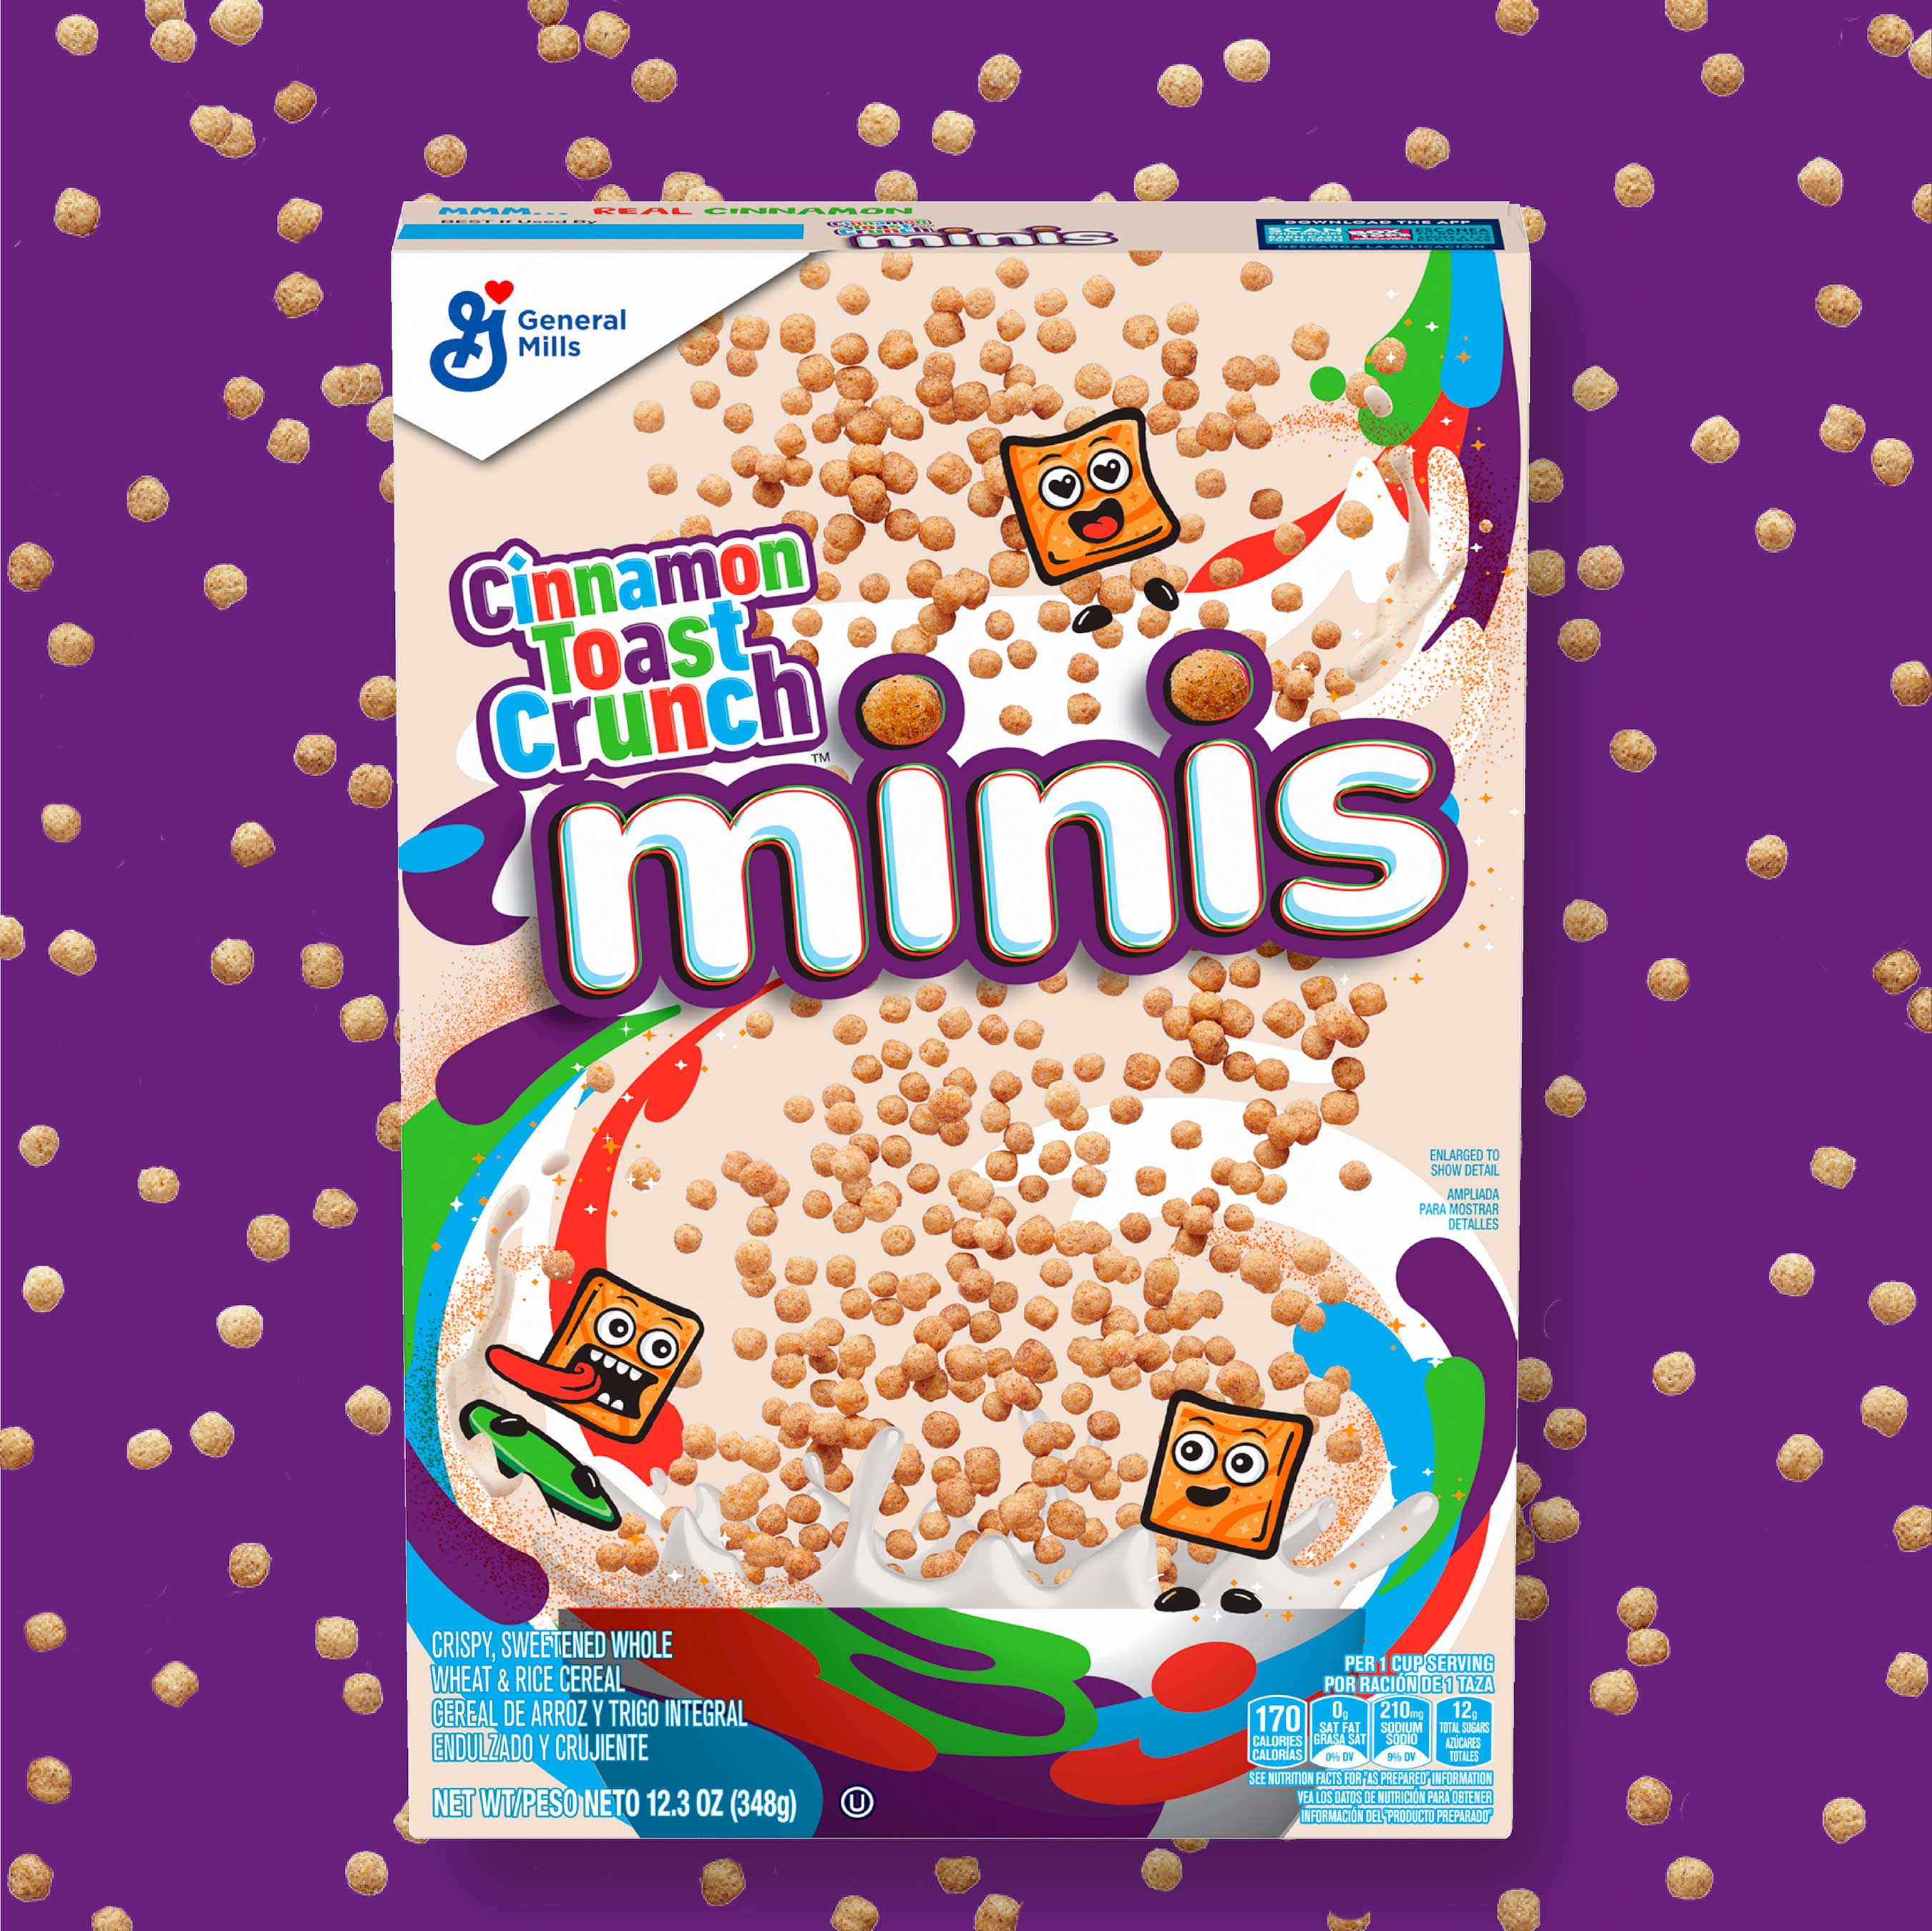 Minis are General Mills’ newest, tiniest way to enjoy fan-favorite cereals Trix, Reese’s Puffs and Cinnamon Toast Crunch.